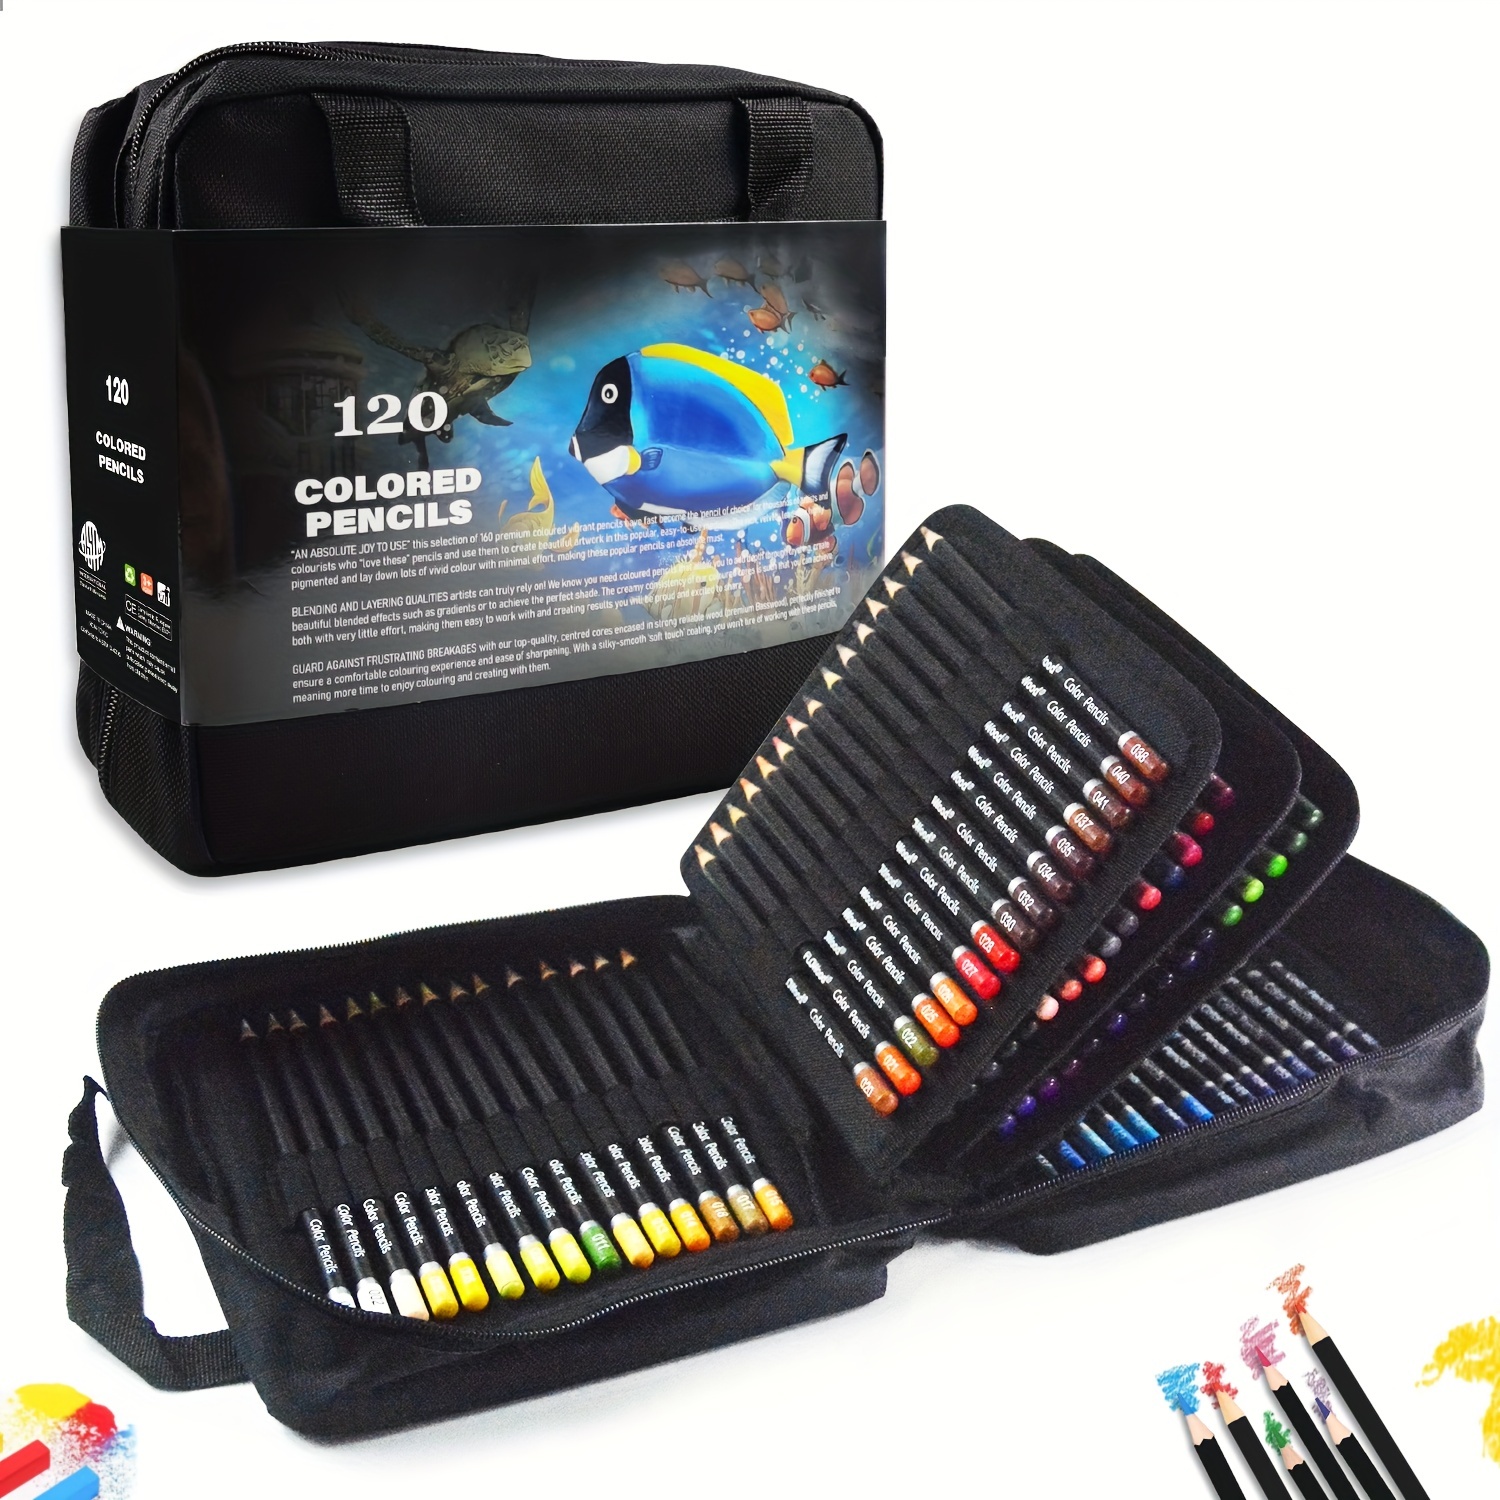 

120 Colored Pencils Zipper-case Set | Quality Soft Core Colored Leads For Adult Artists, Professionals And Colorists | In Neat, Strong Carry-anywhere Zipper Case